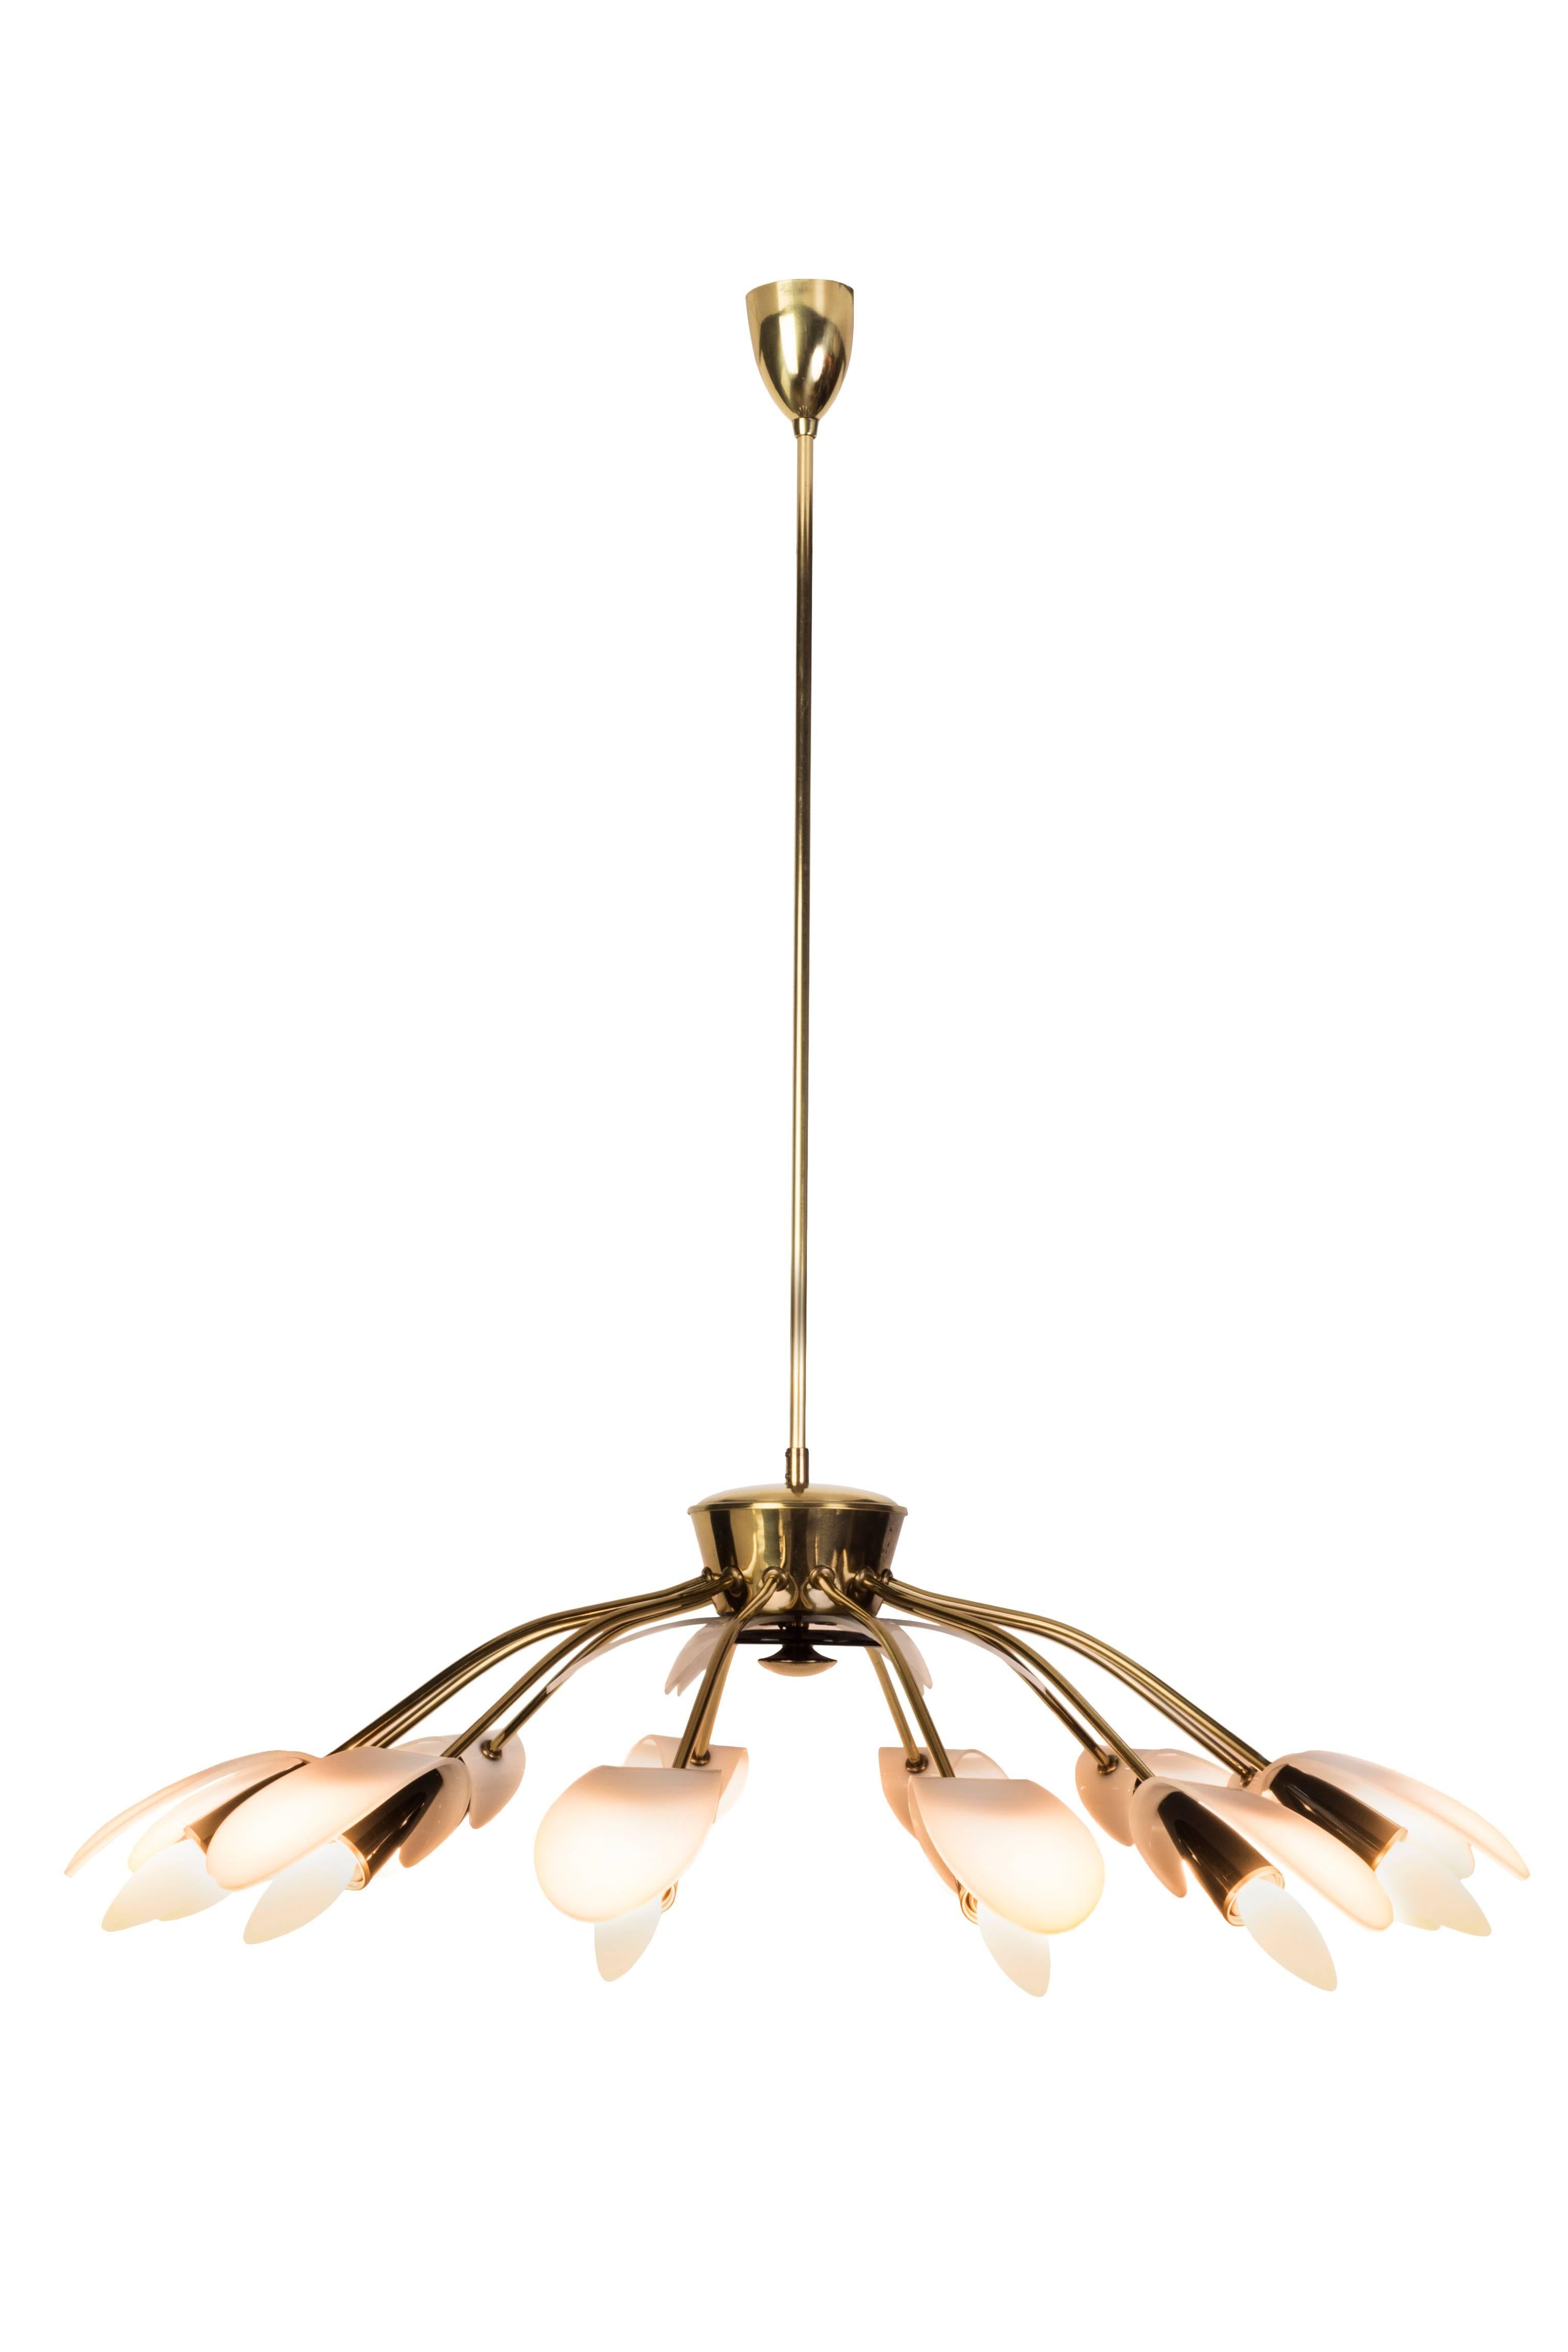 This exceptional 1950s Mid-Century modernist black spider twelve-light German sputnik chandelier pendant lamp is made out of a brass frame and Lucite shades and features exposed tulip bulbs. The chandelier is in excellent, original condition and is